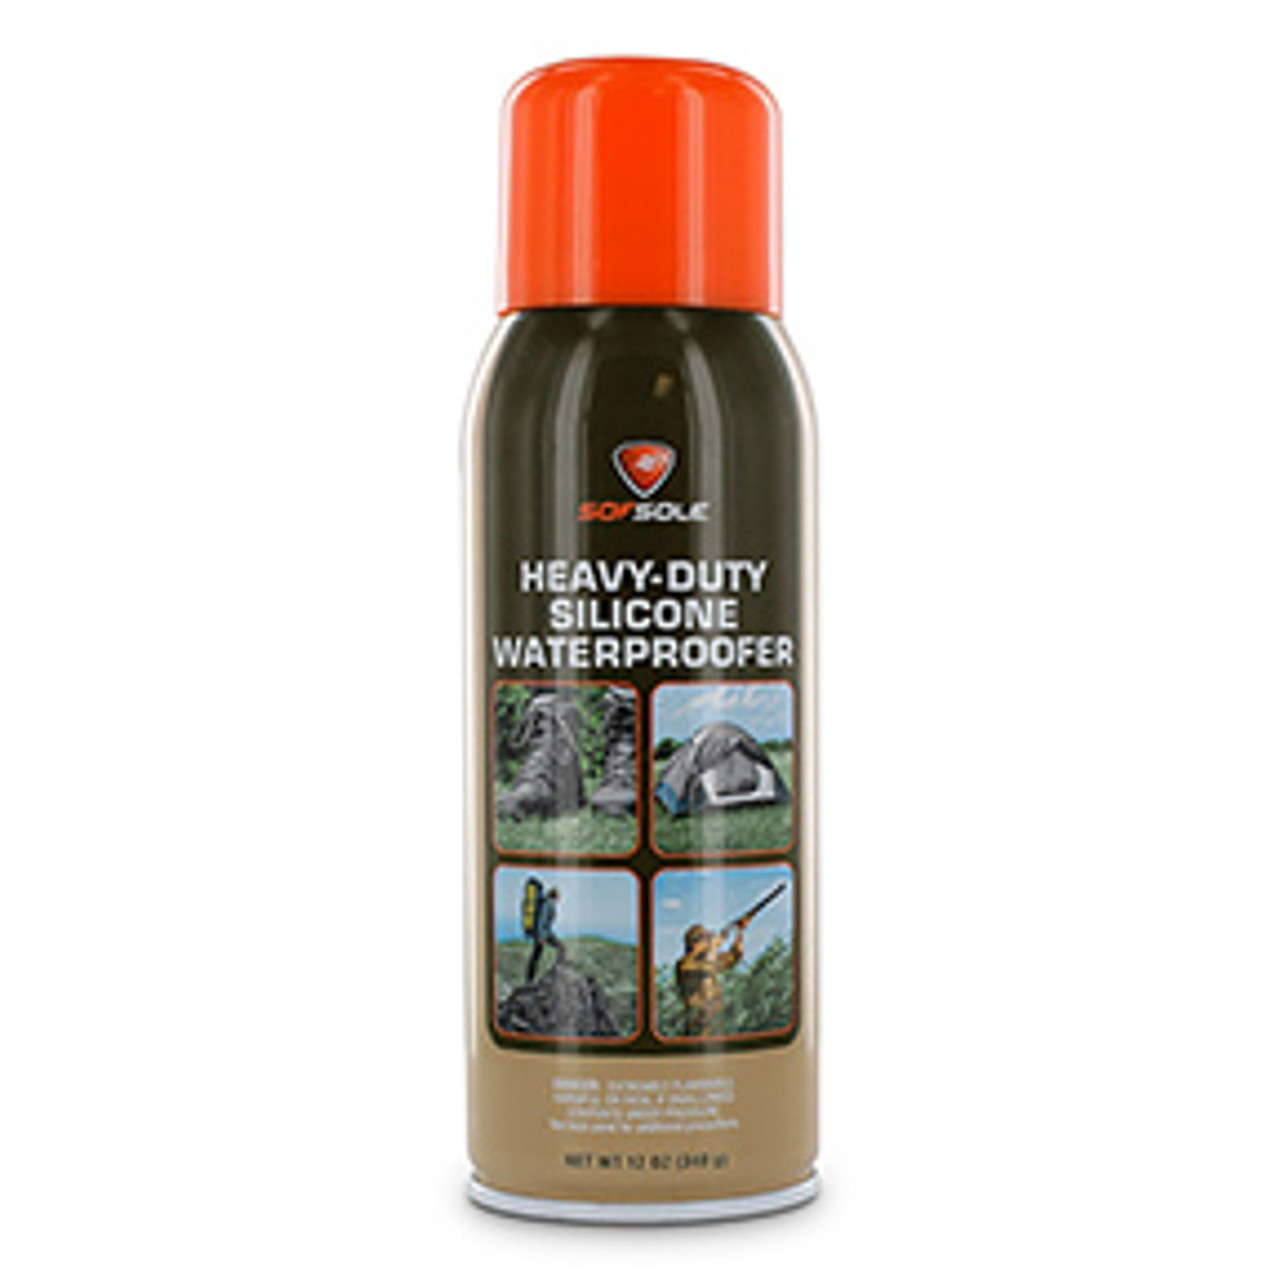 Sof Sole Heavy-Duty Silicone Waterproofer, Spray-On, Stain Resistant at  Tractor Supply Co.